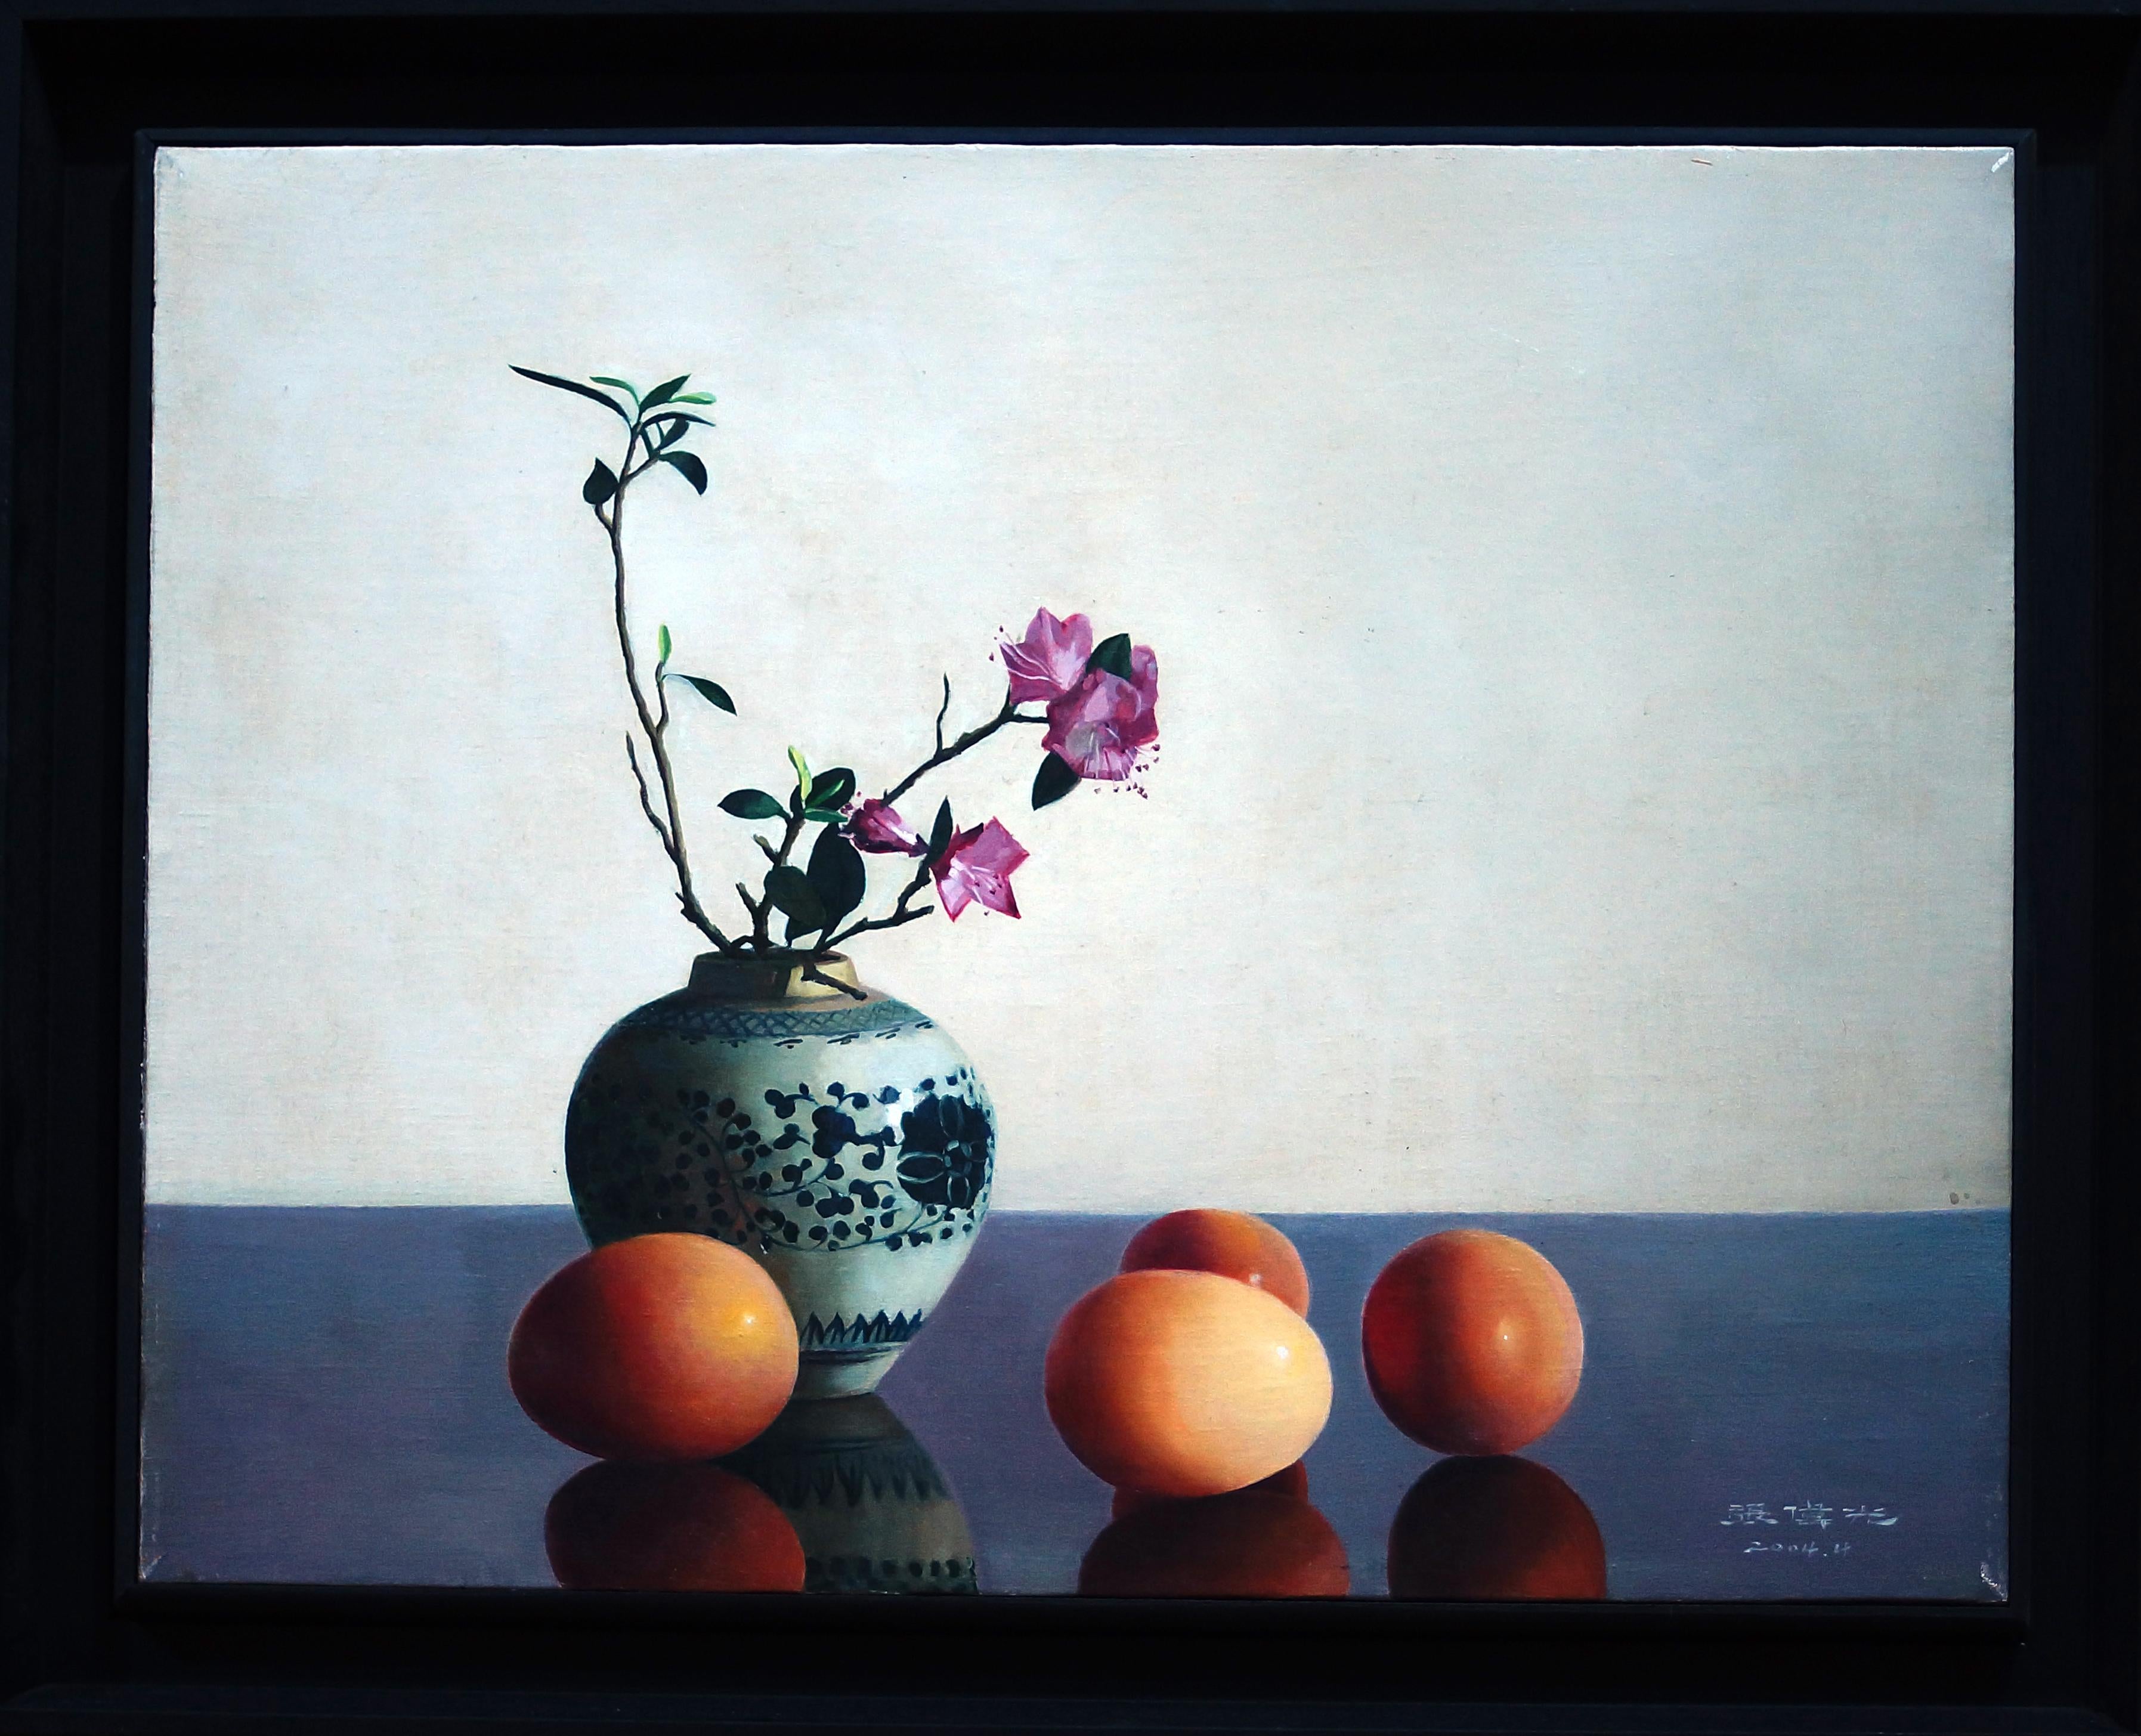 Flowers and Eggs (LU65034434971) is an original oil on canvas realized by the chinese painter Zhang Wei Guang (Mirror) in 2004.
Excellent conditions.

Chinese Antiques on the Table (LU65034433301) is an original oil on canvas realized by the chinese